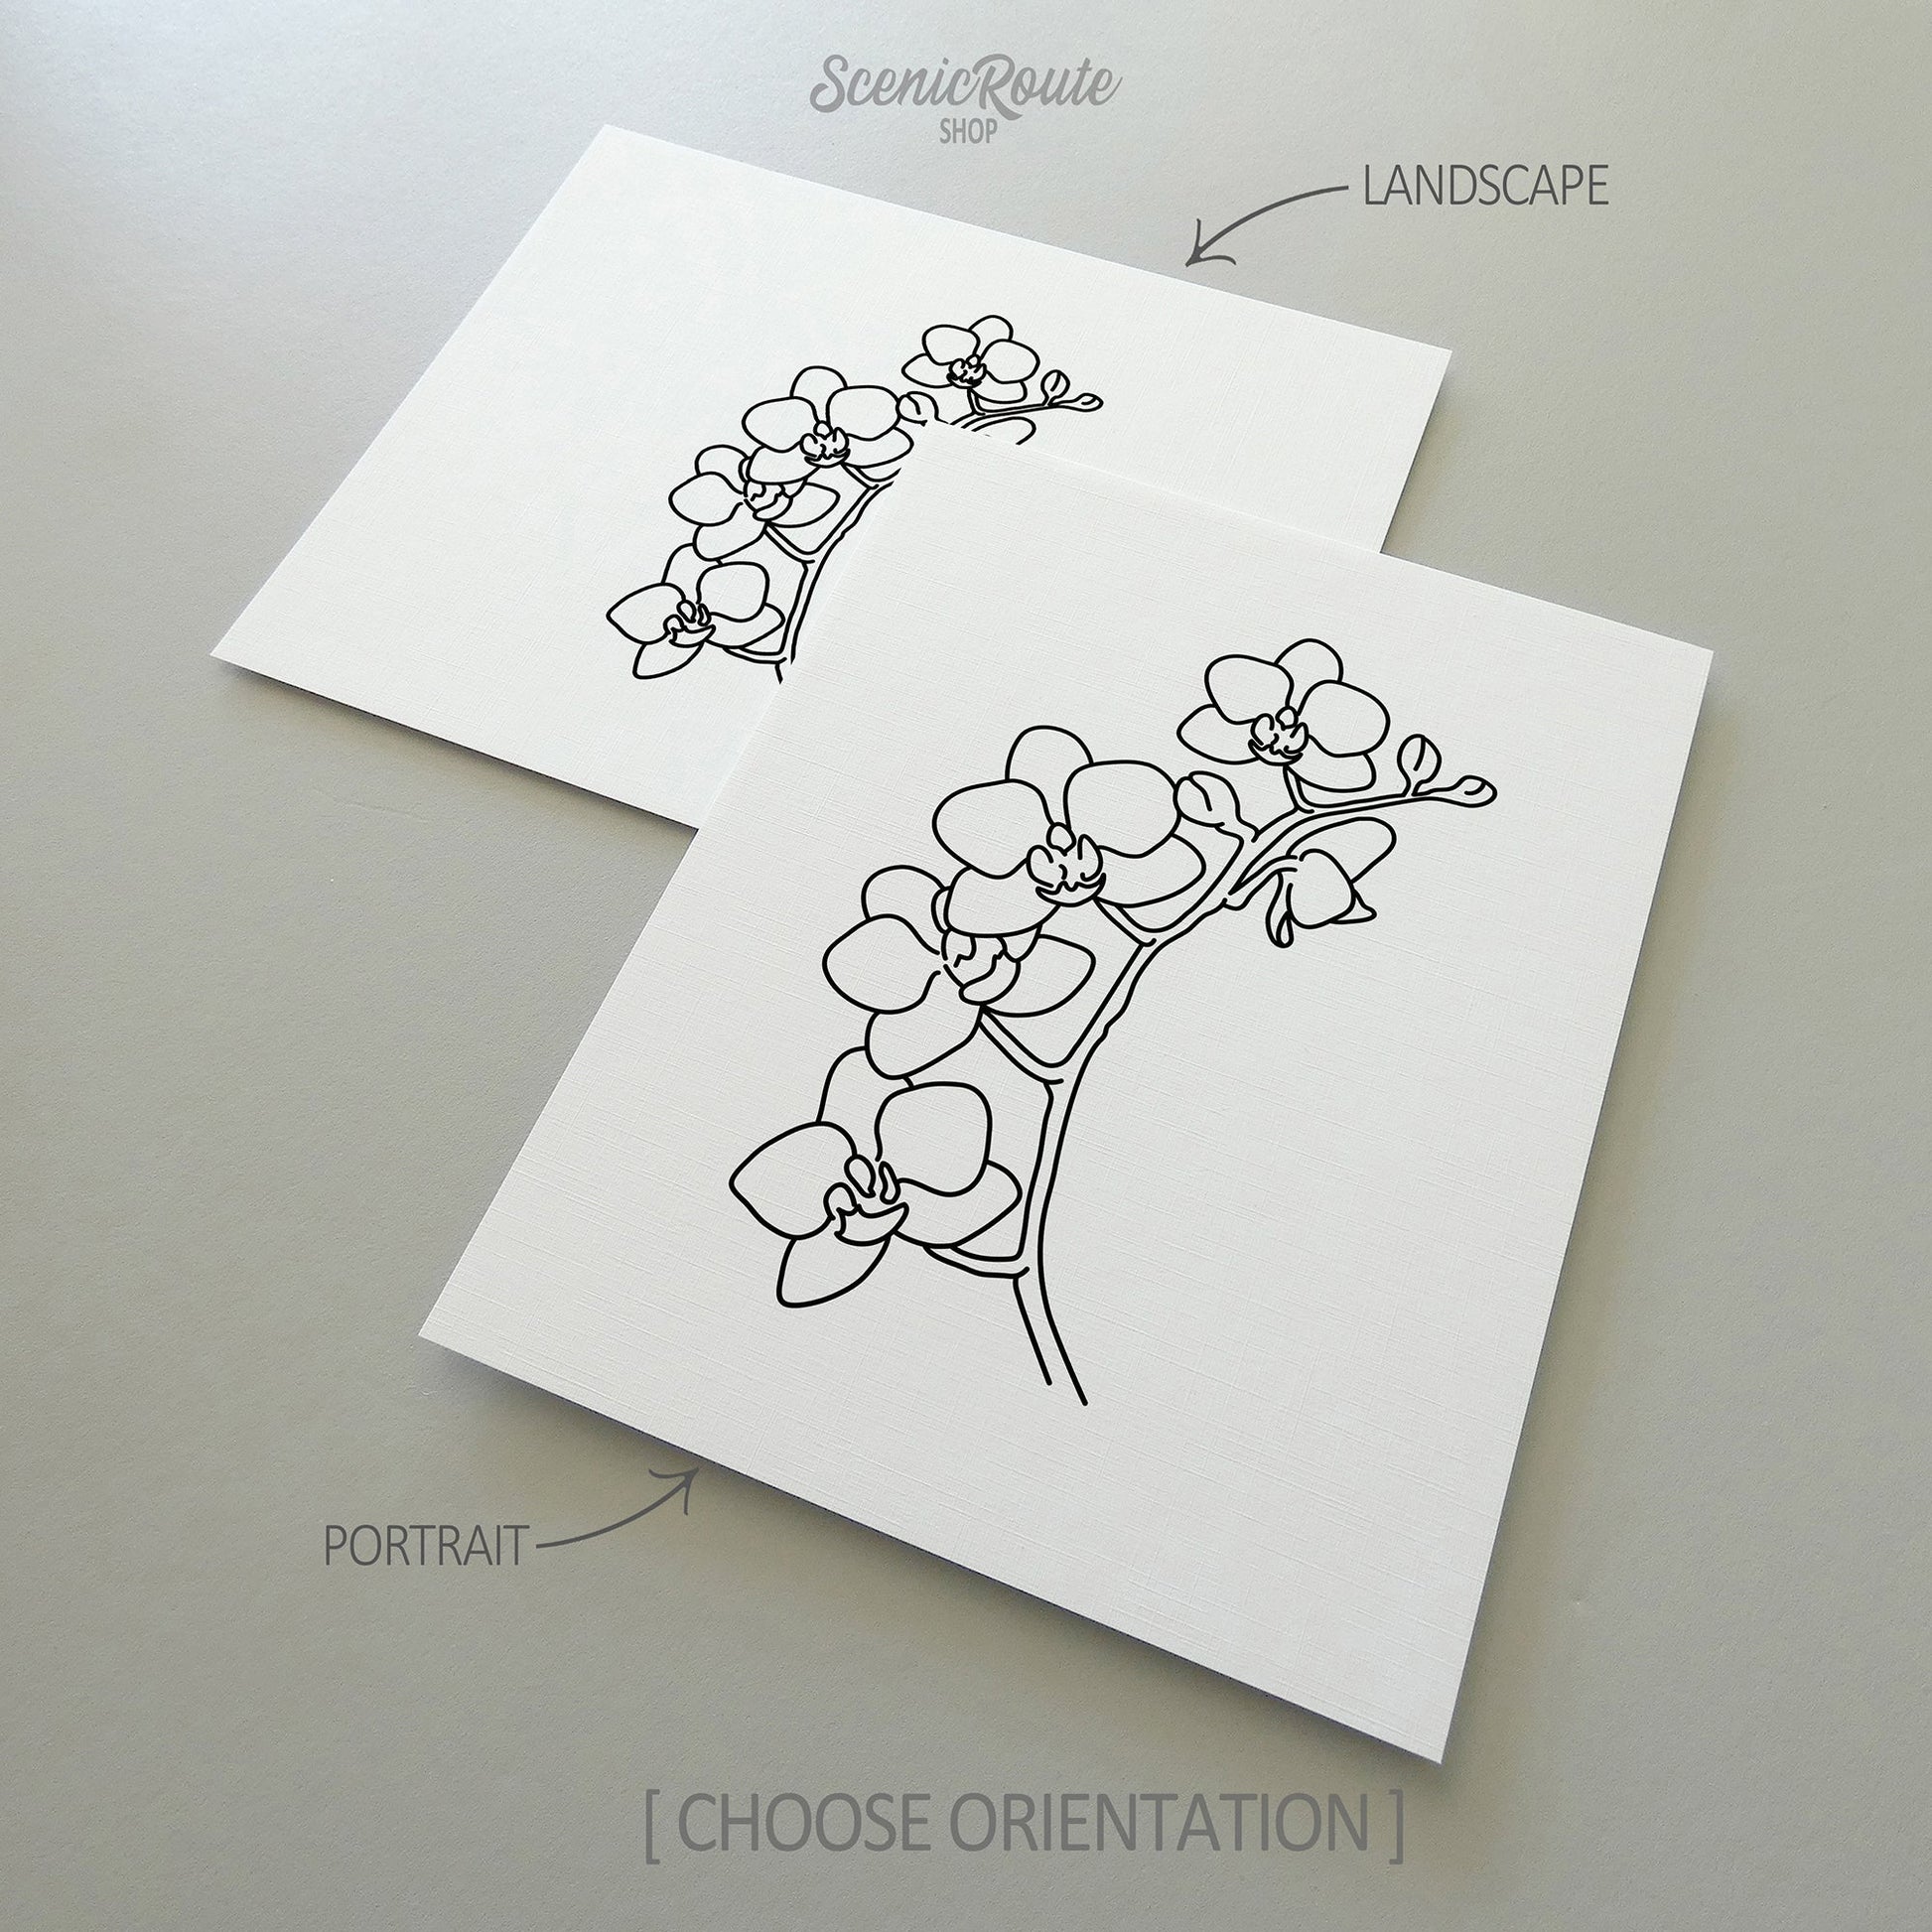 Two line art drawings of a Orchid Flower on white linen paper with a gray background.  The pieces are shown in portrait and landscape orientation for the available art print options.